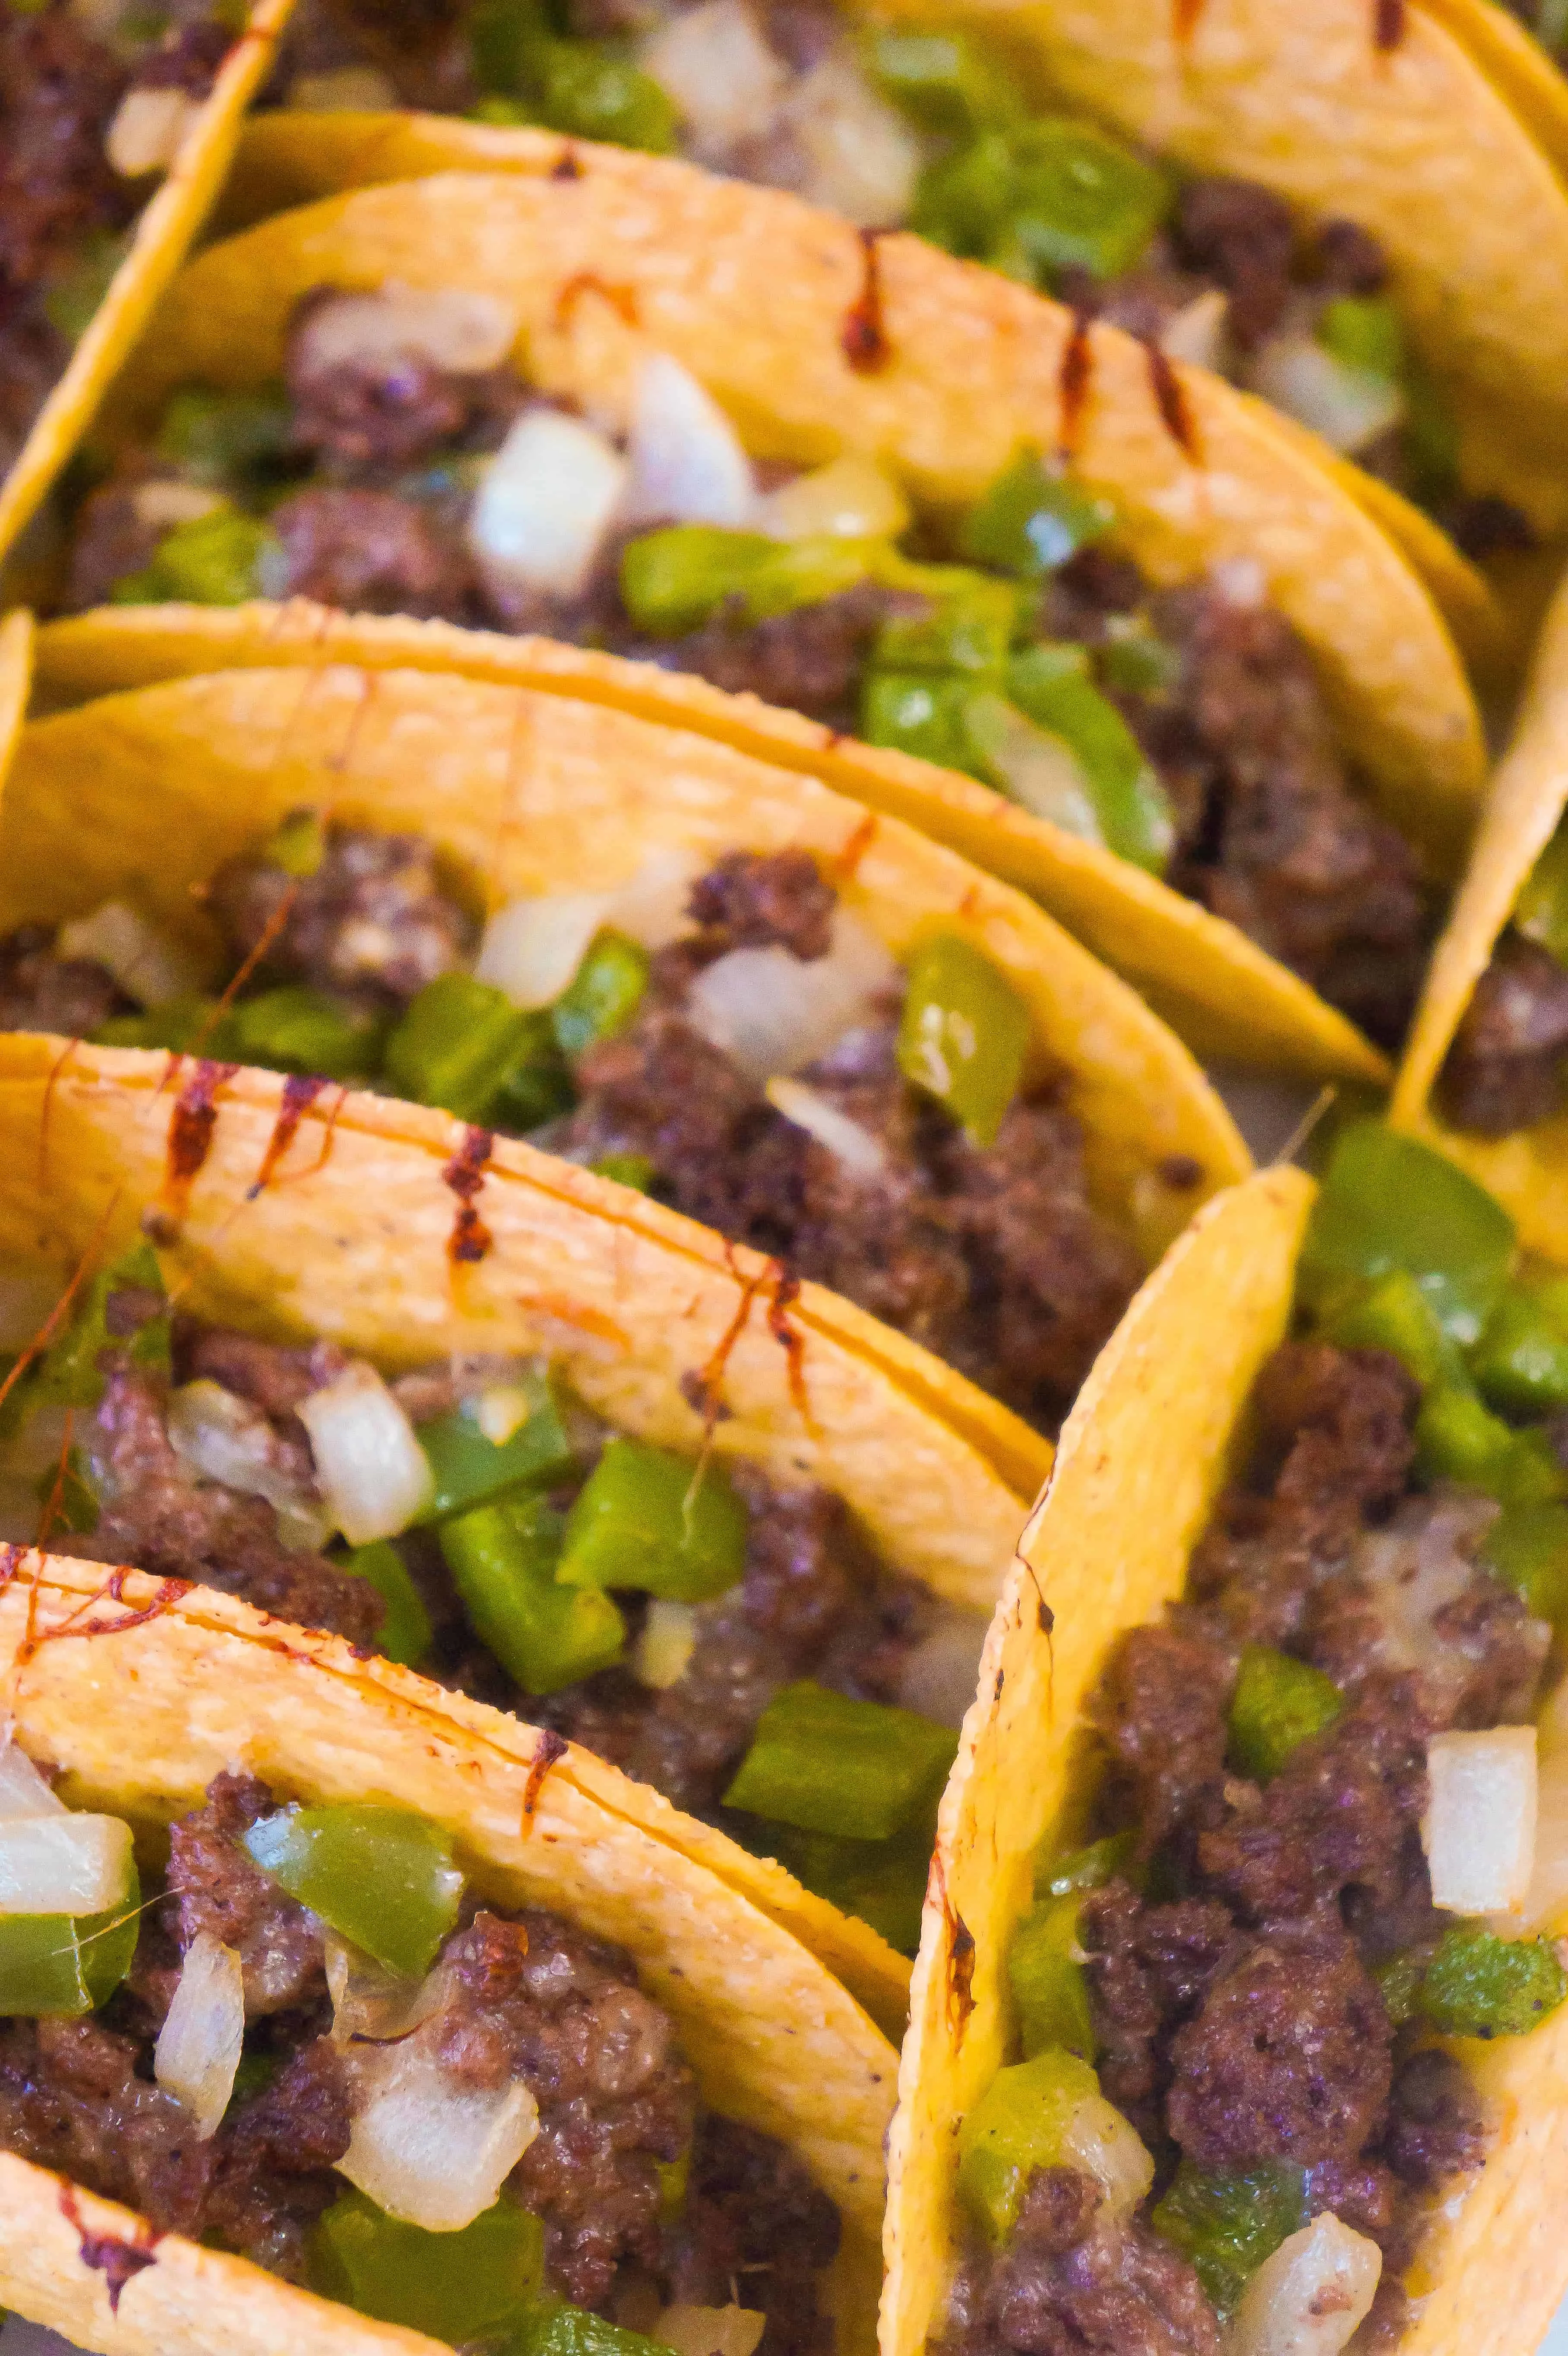 Philly Cheese Steak Ground Beef Tacos are loaded with onions, green peppers and mozzarella cheese.